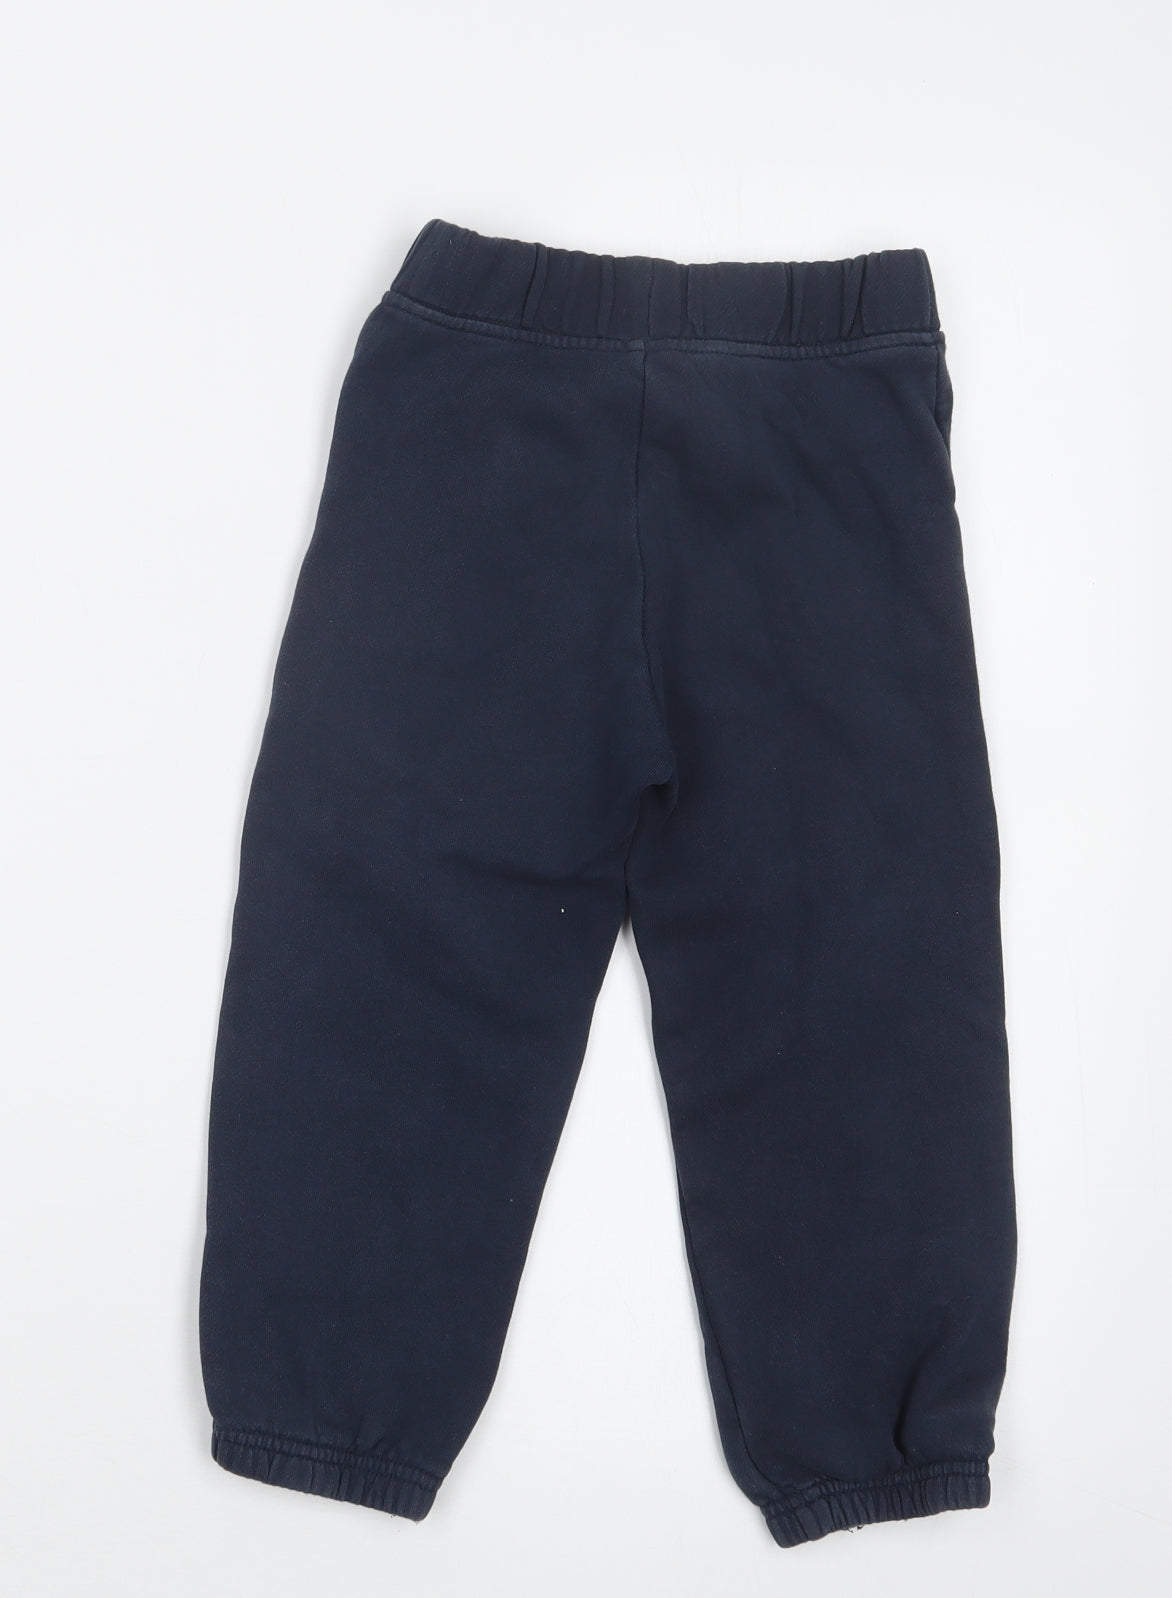 John Lewis Boys Blue   Jogger Trousers Size 3-4 Years